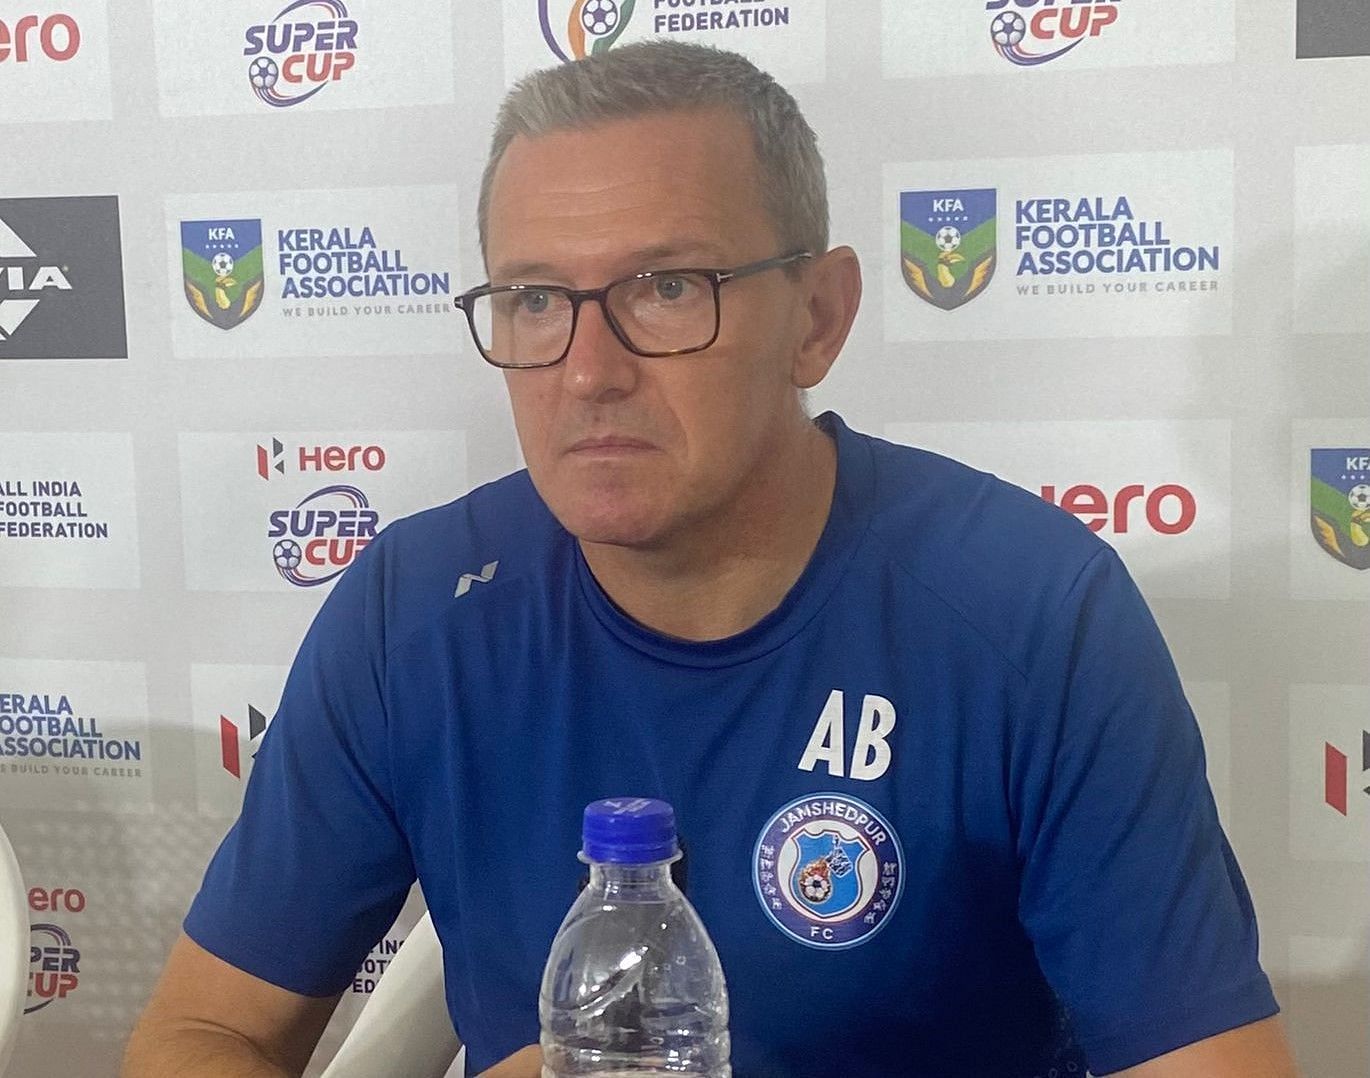 Aidy Boothroyd attending the press conference ahead of their semi-final clash against Bengaluru FC.